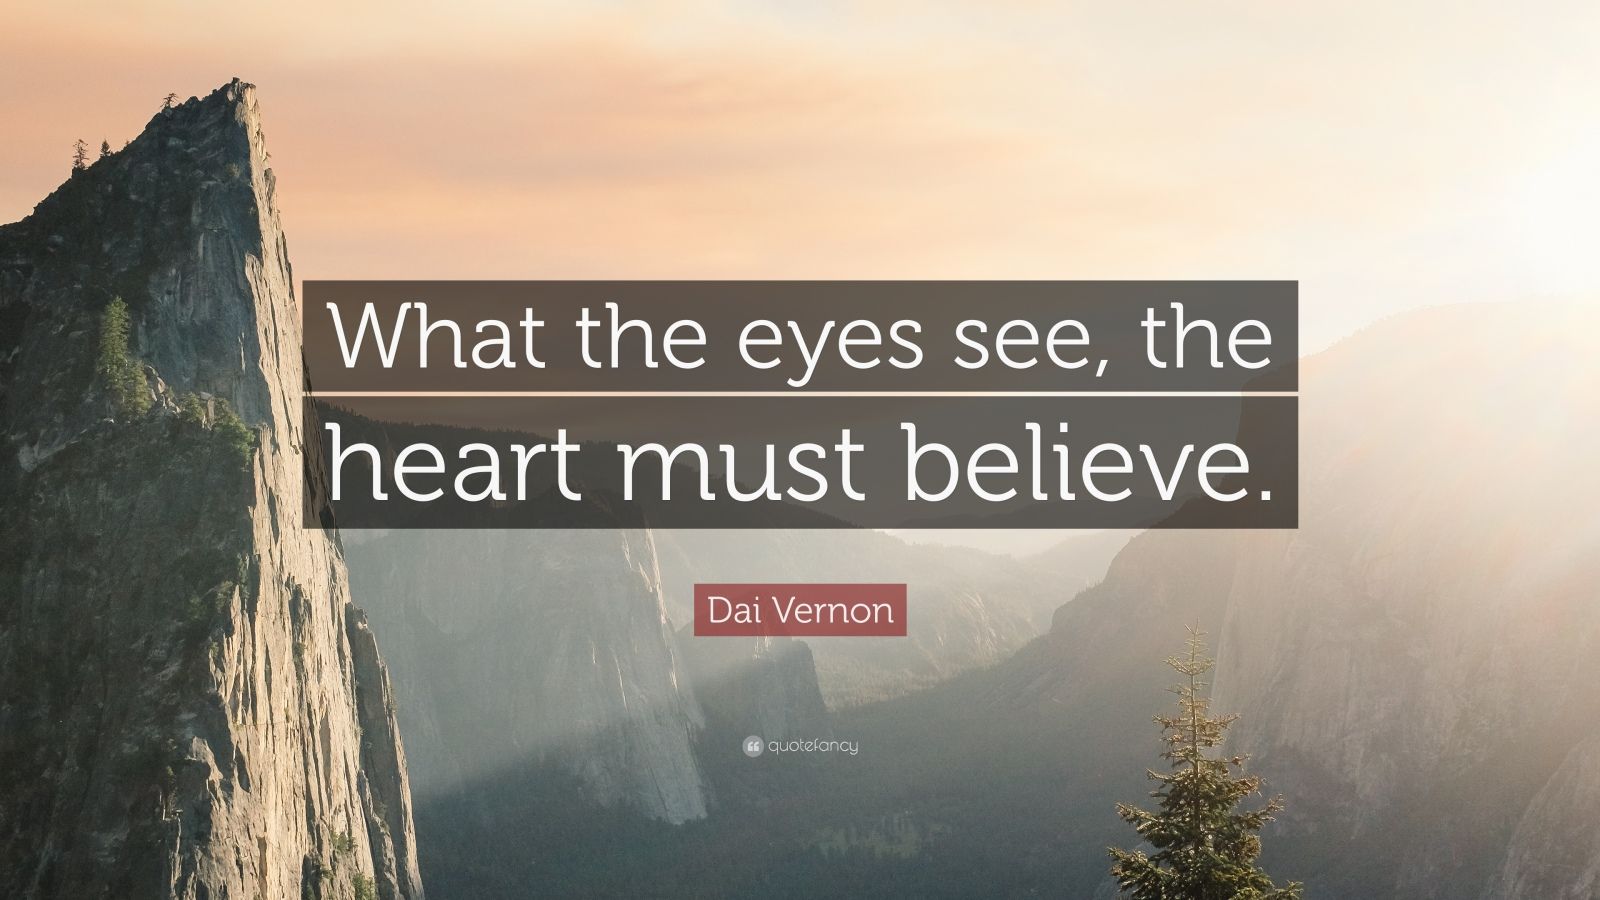 Dai Vernon Quote: “What the eyes see, the heart must believe.” (10 ...